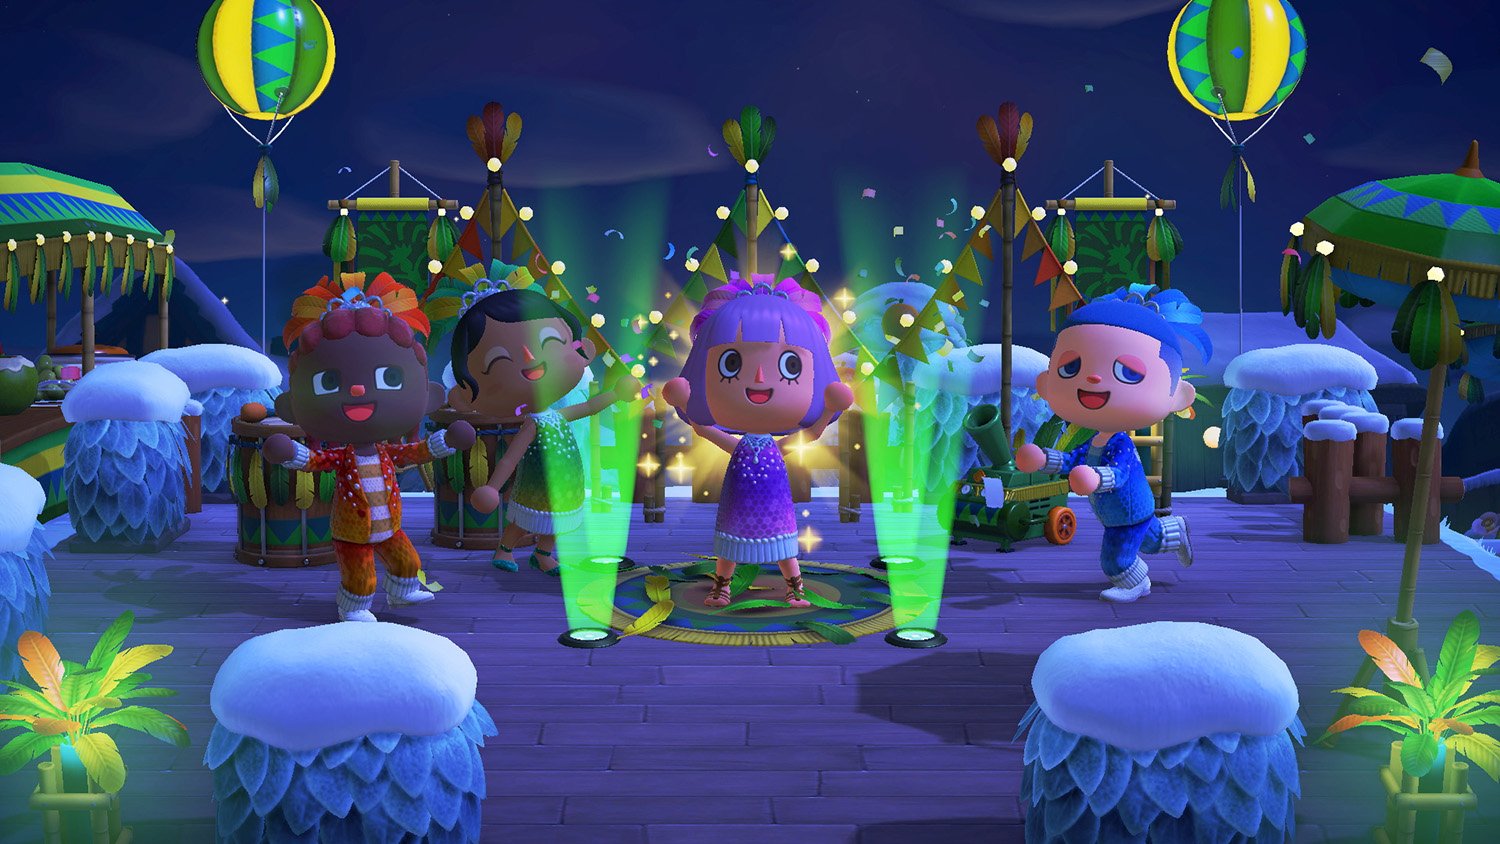 The Festivale event in Animal Crossing: New Horizons